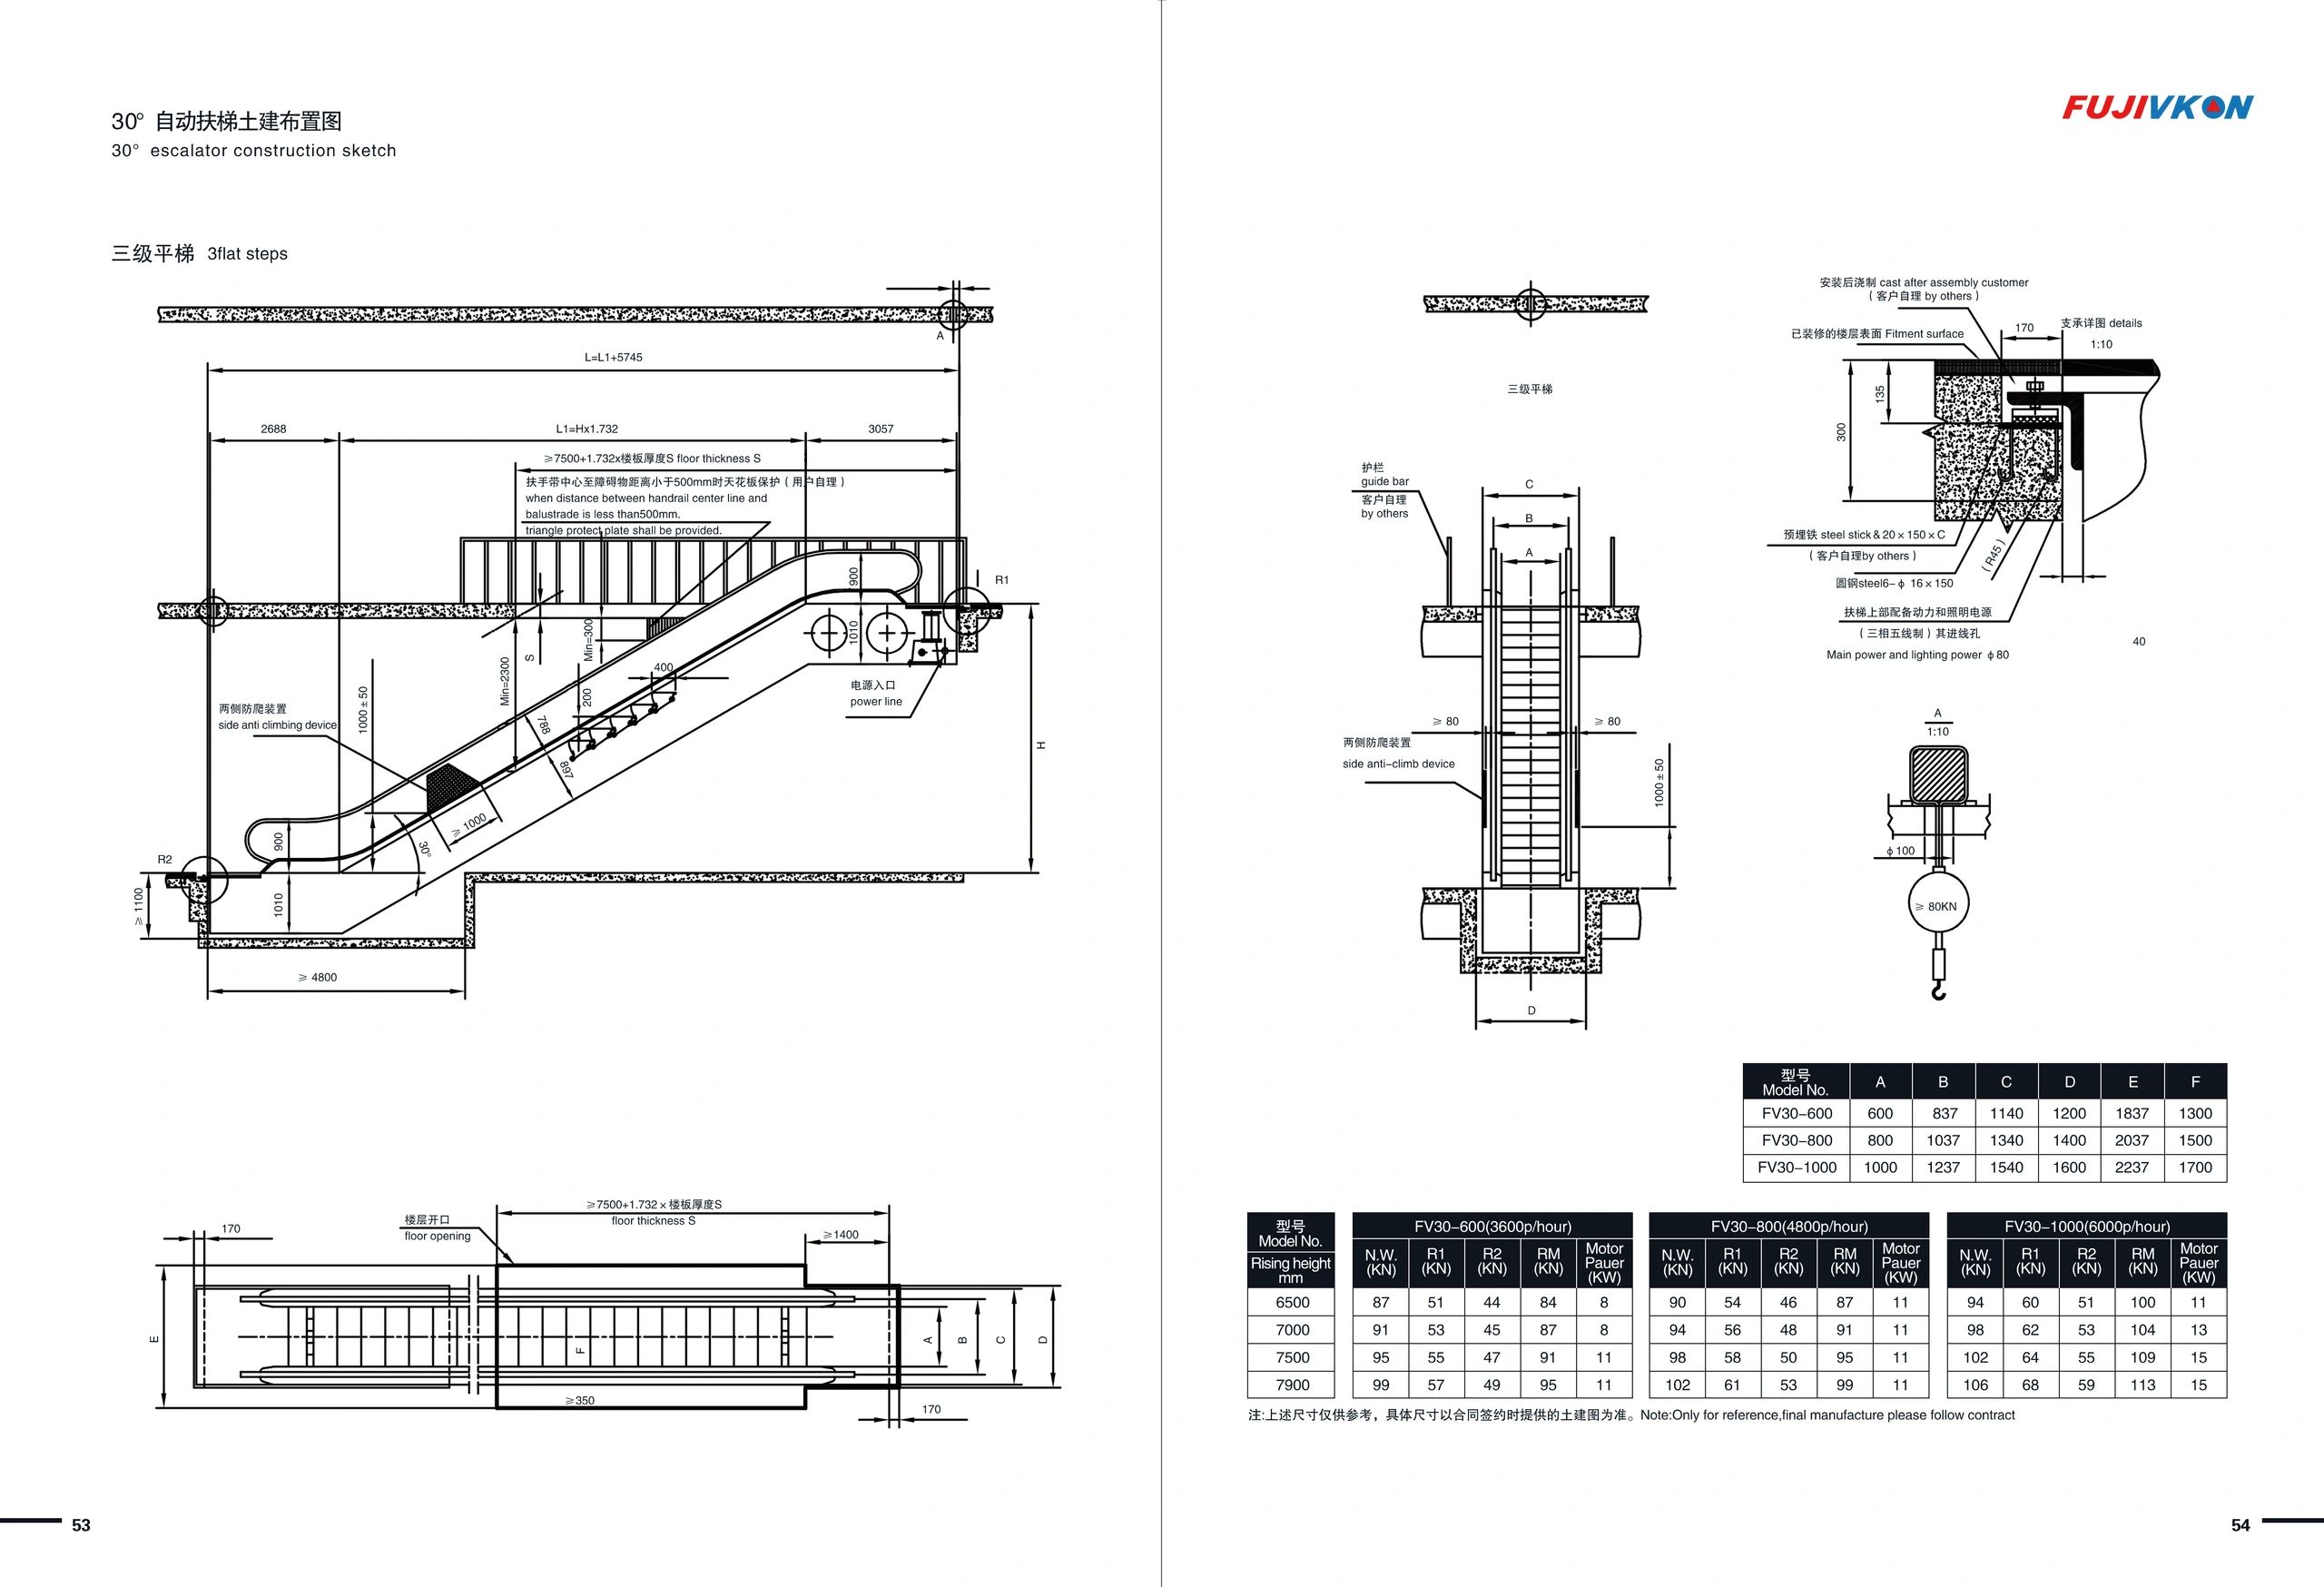 30 degree escalator layout, drawings, standard configuration , parameter. Manufacturer in China